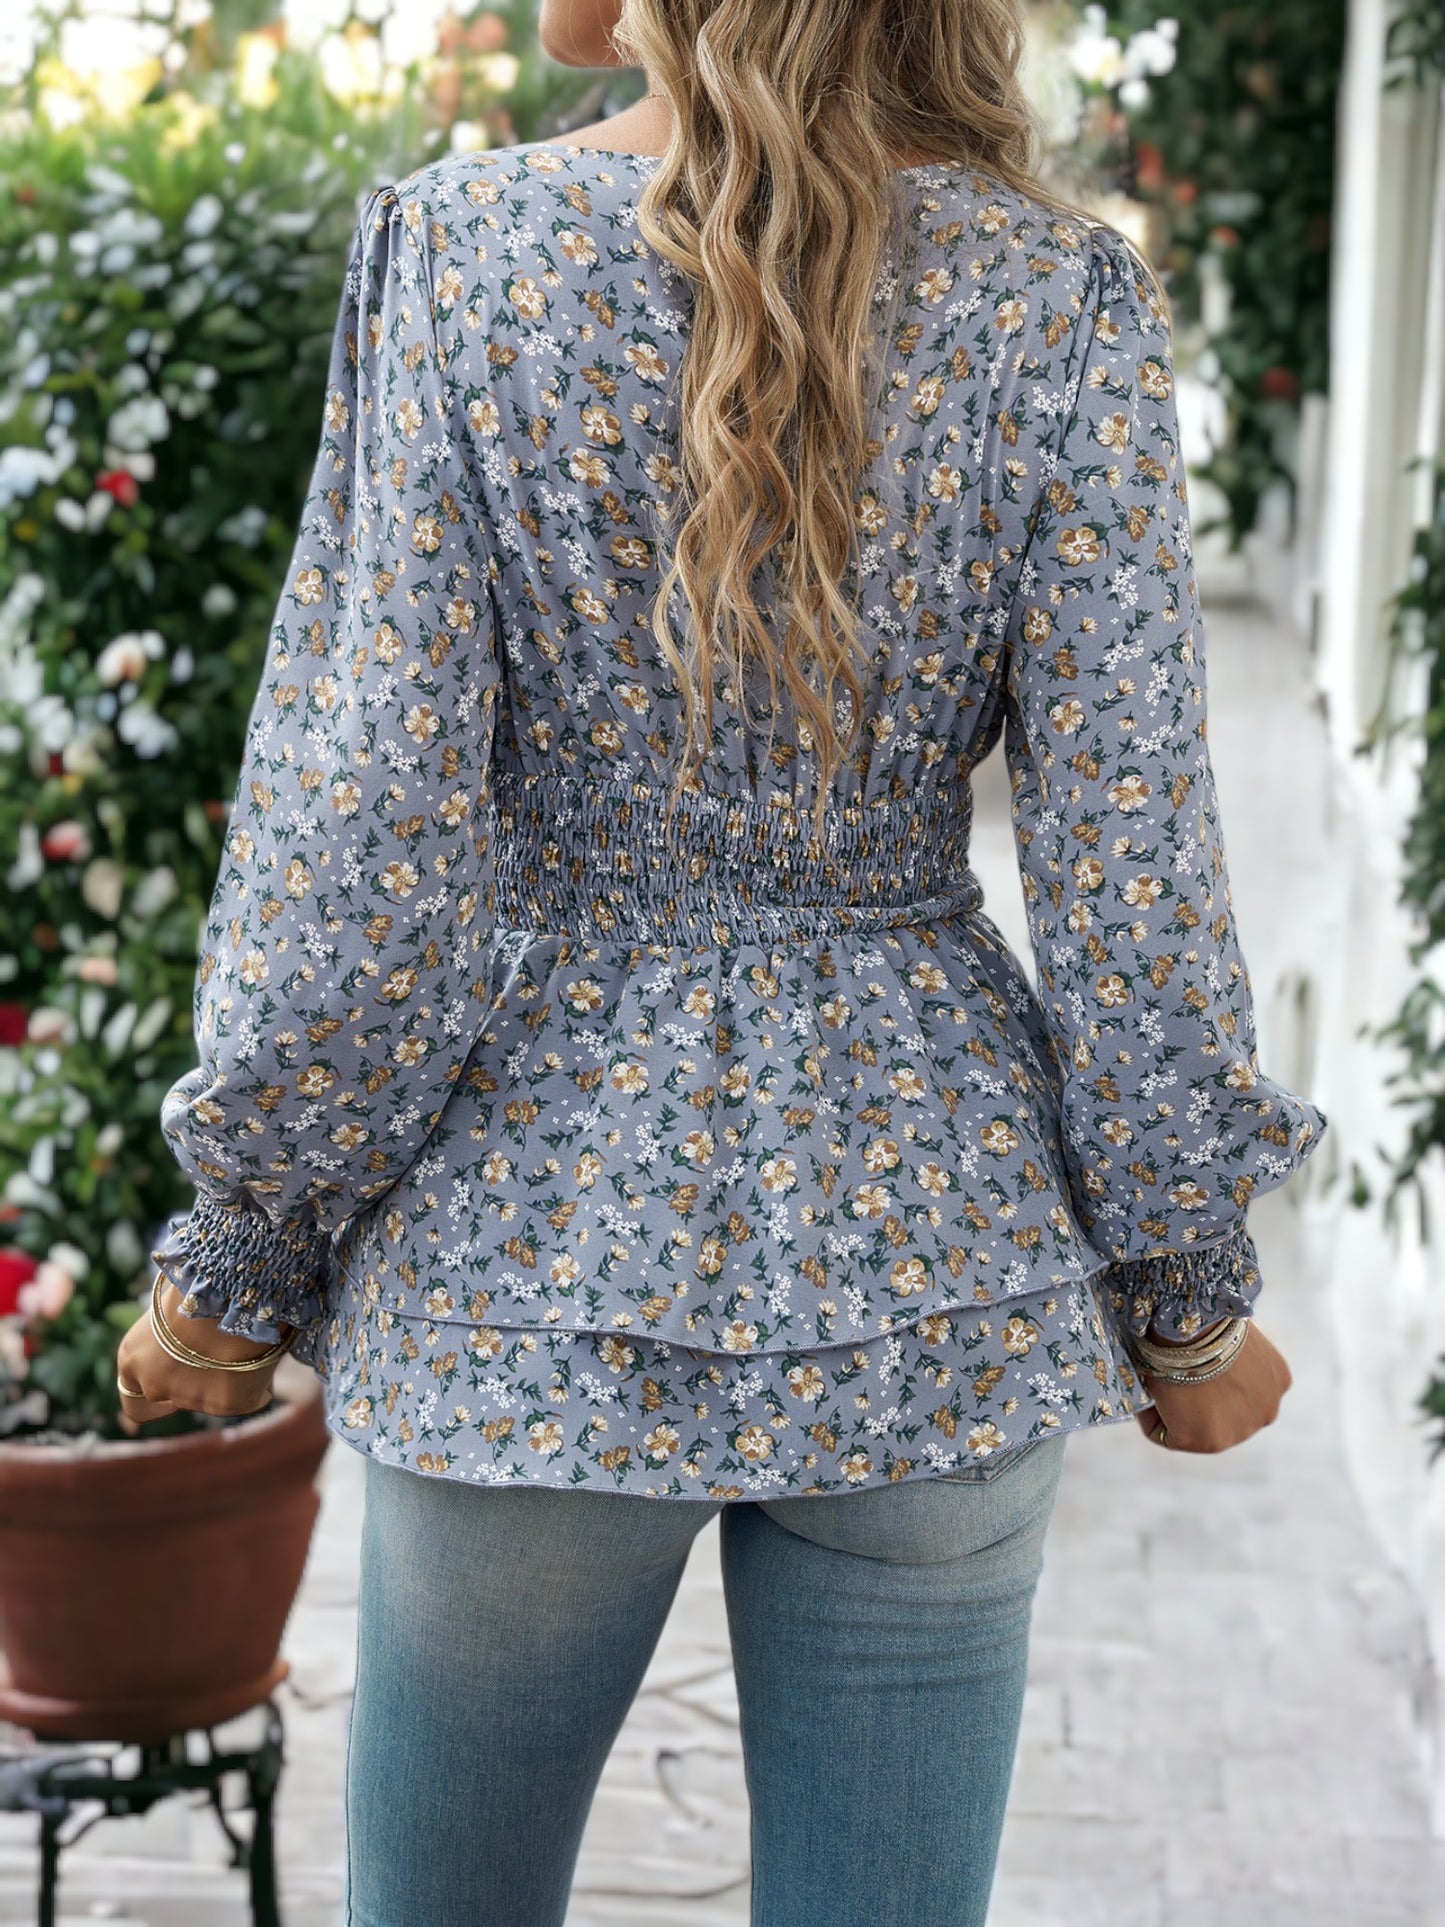 Floral Print Tiered Peplum Blouse